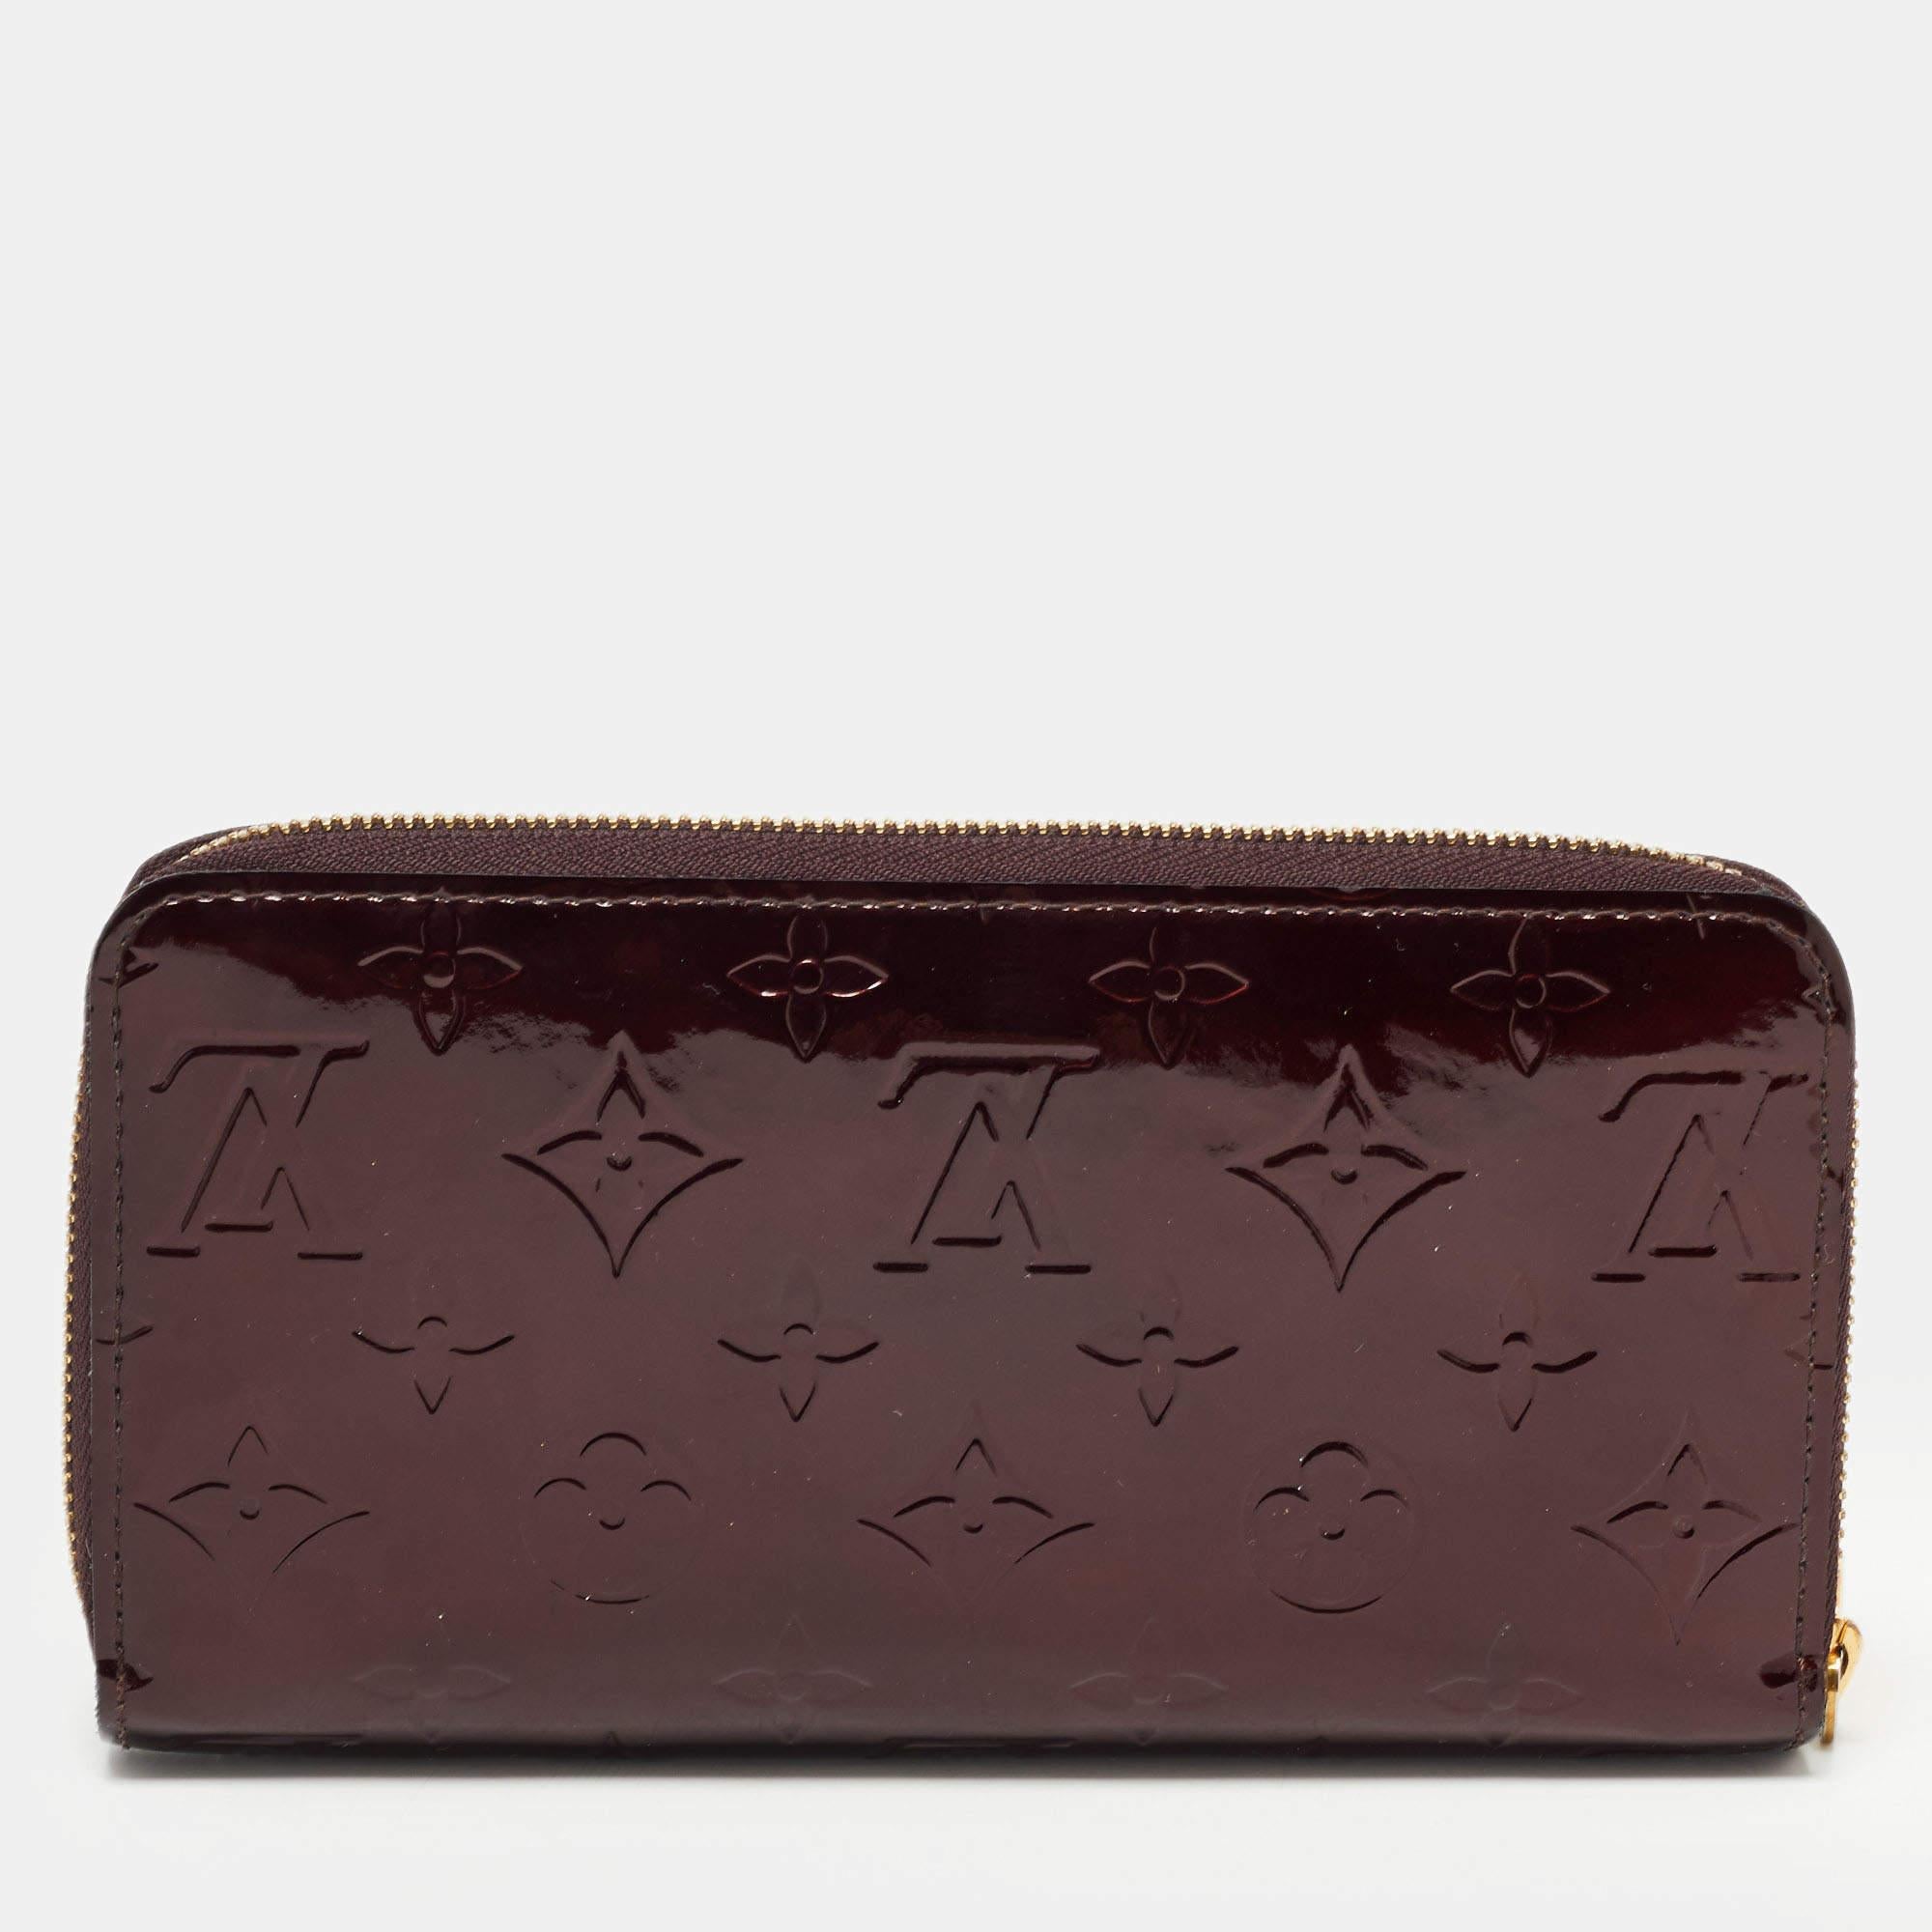 This Louis Vuitton Zippy wallet is conveniently designed for everyday use. Crafted from Monogram Vernis, the wallet has a wide zip closure that opens to reveal multiple slots, lined compartments, and a zip pocket for you to arrange your daily